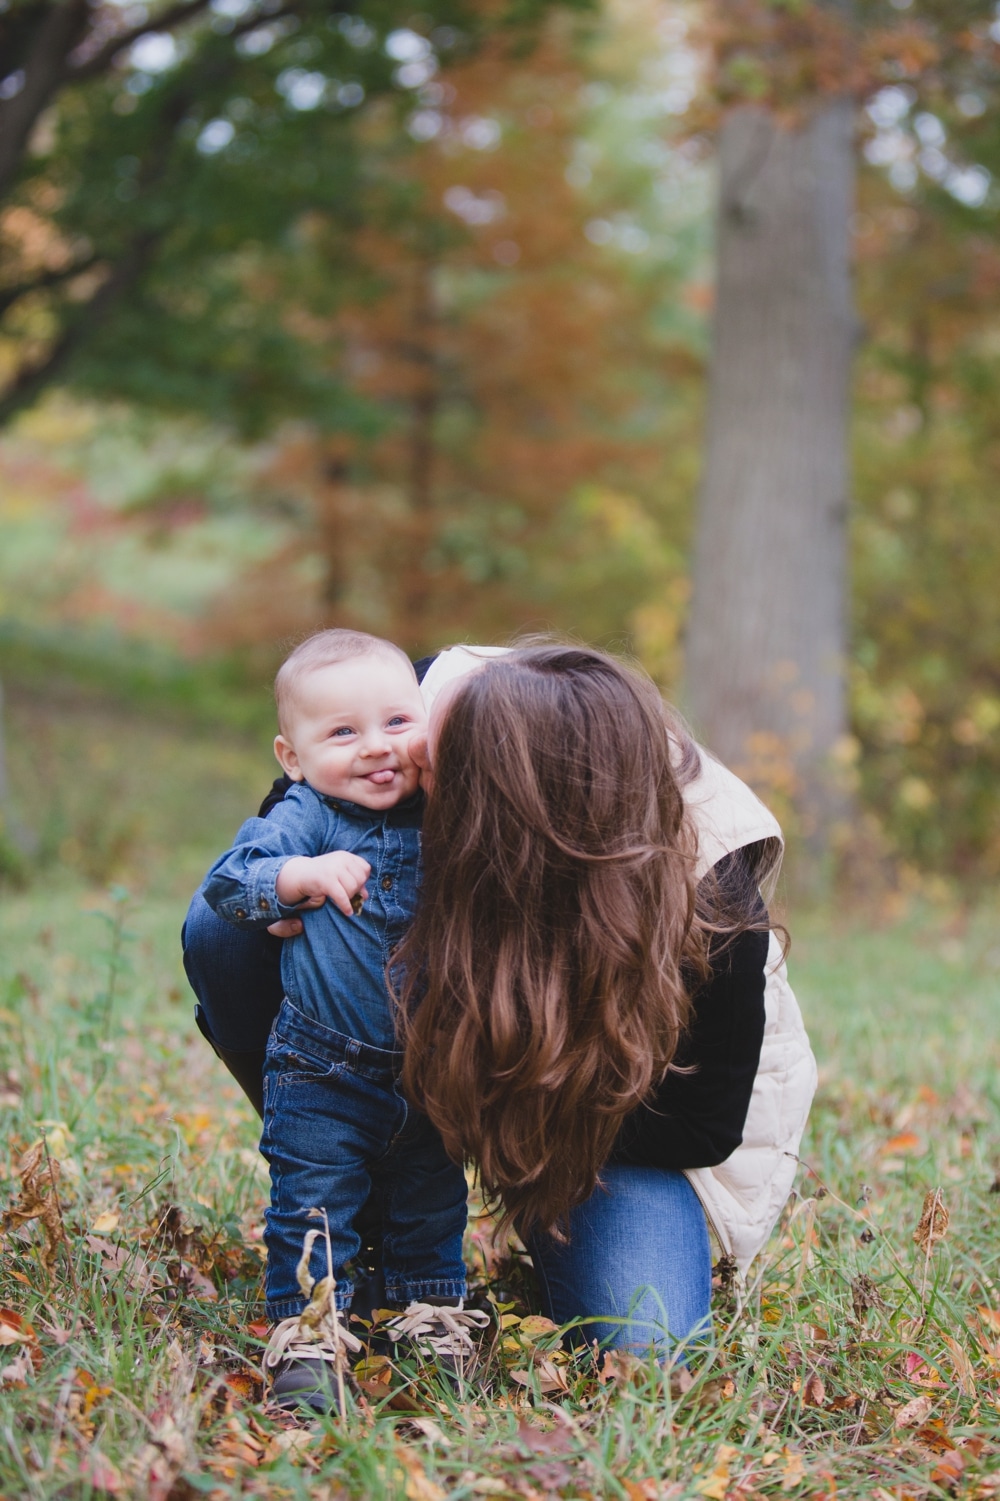 A photojournalistic photograph of a mother kissing her baby boy during a lifestyle mini session at Boston's Arnold Arboretum in Massachusetts